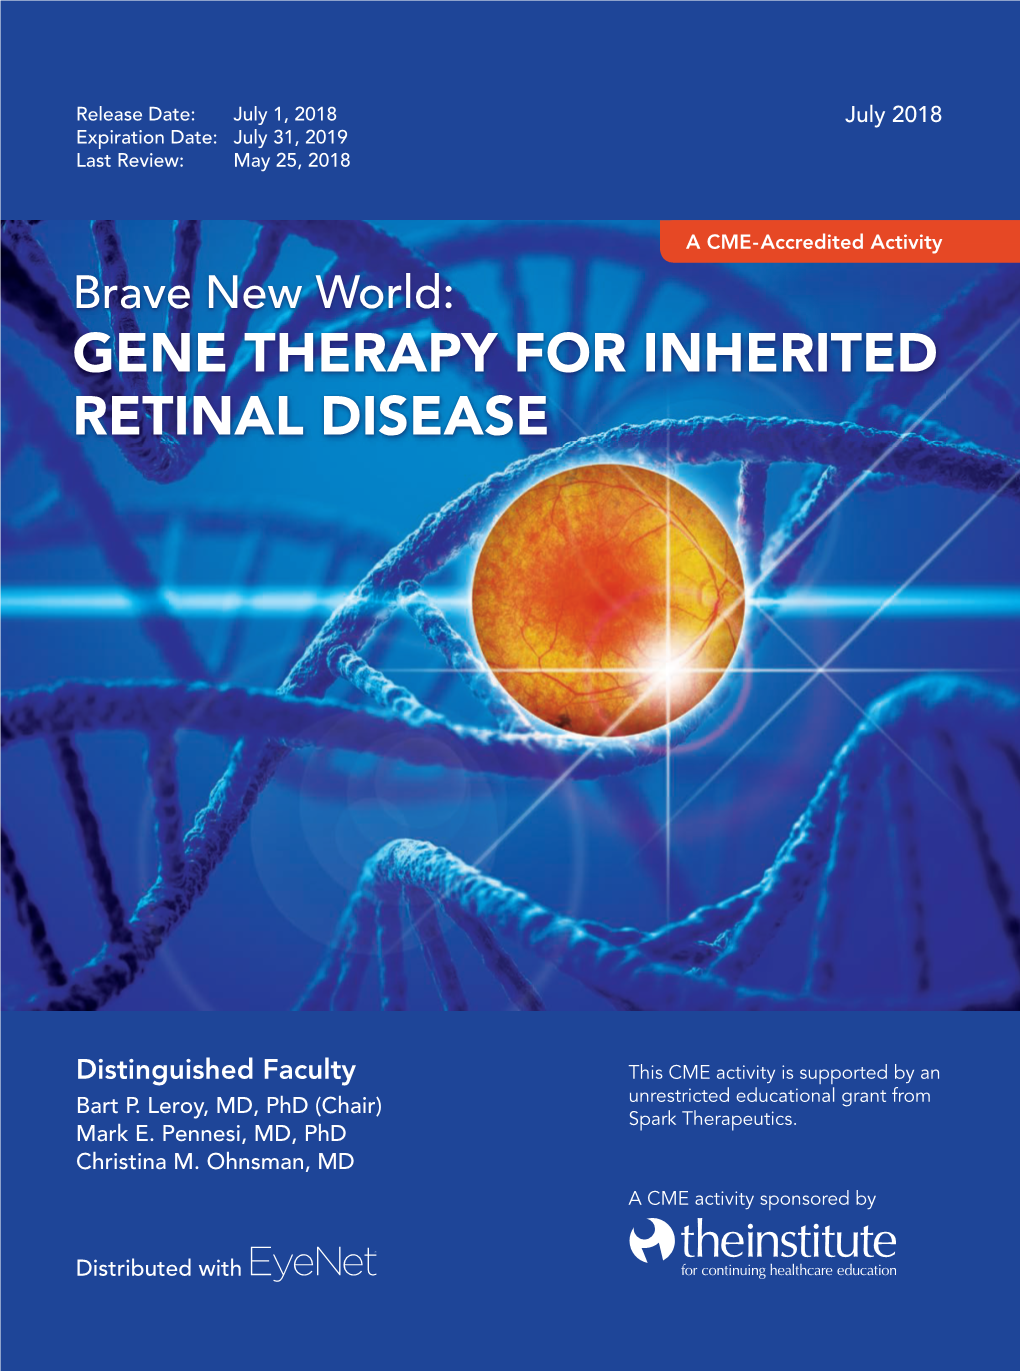 Gene Therapy for Inherited Retinal Disease